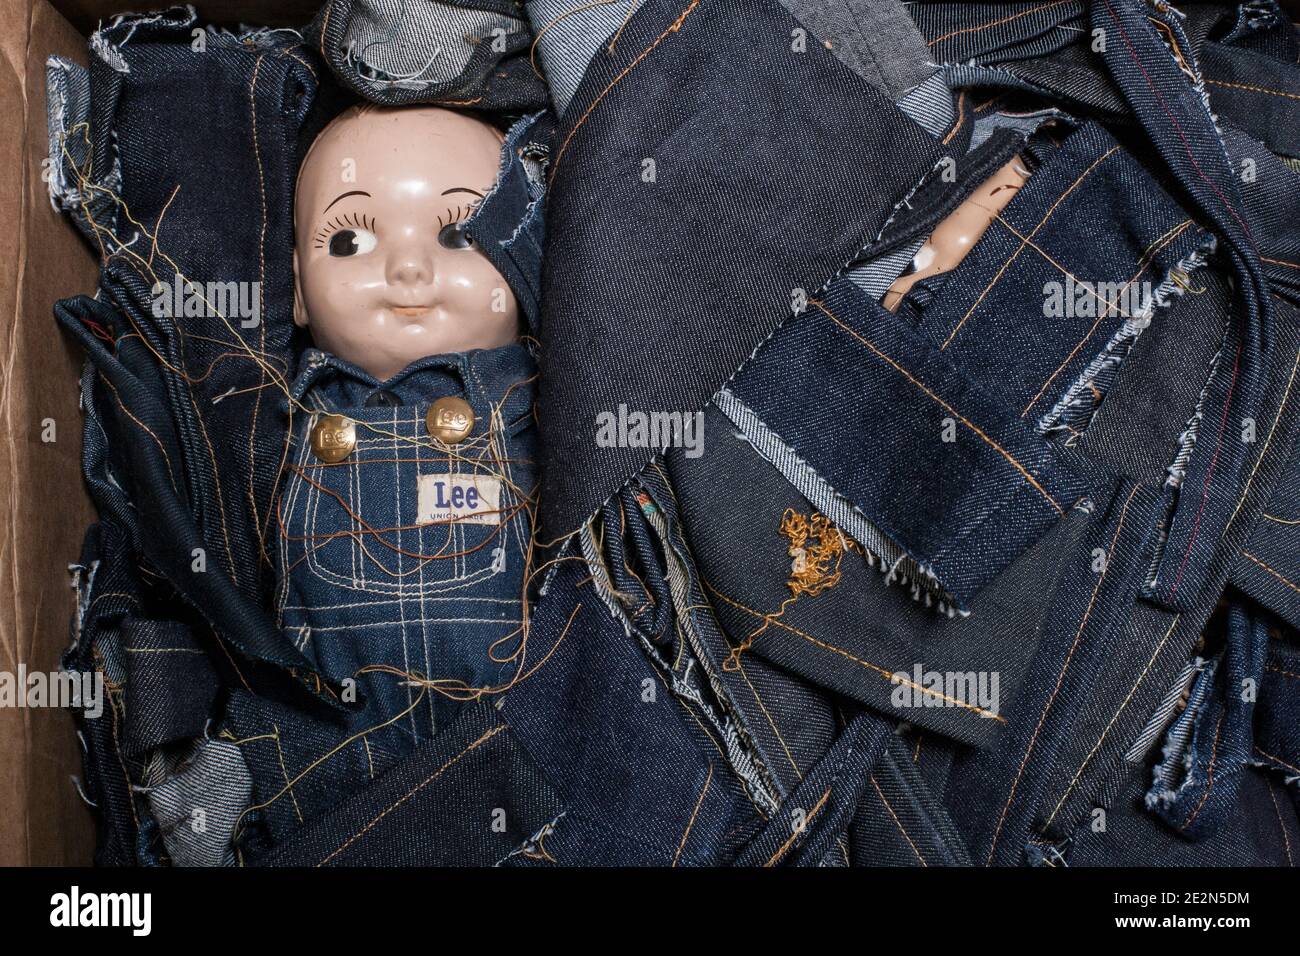 Buddy Lee doll with jeans fabric Stock Photo